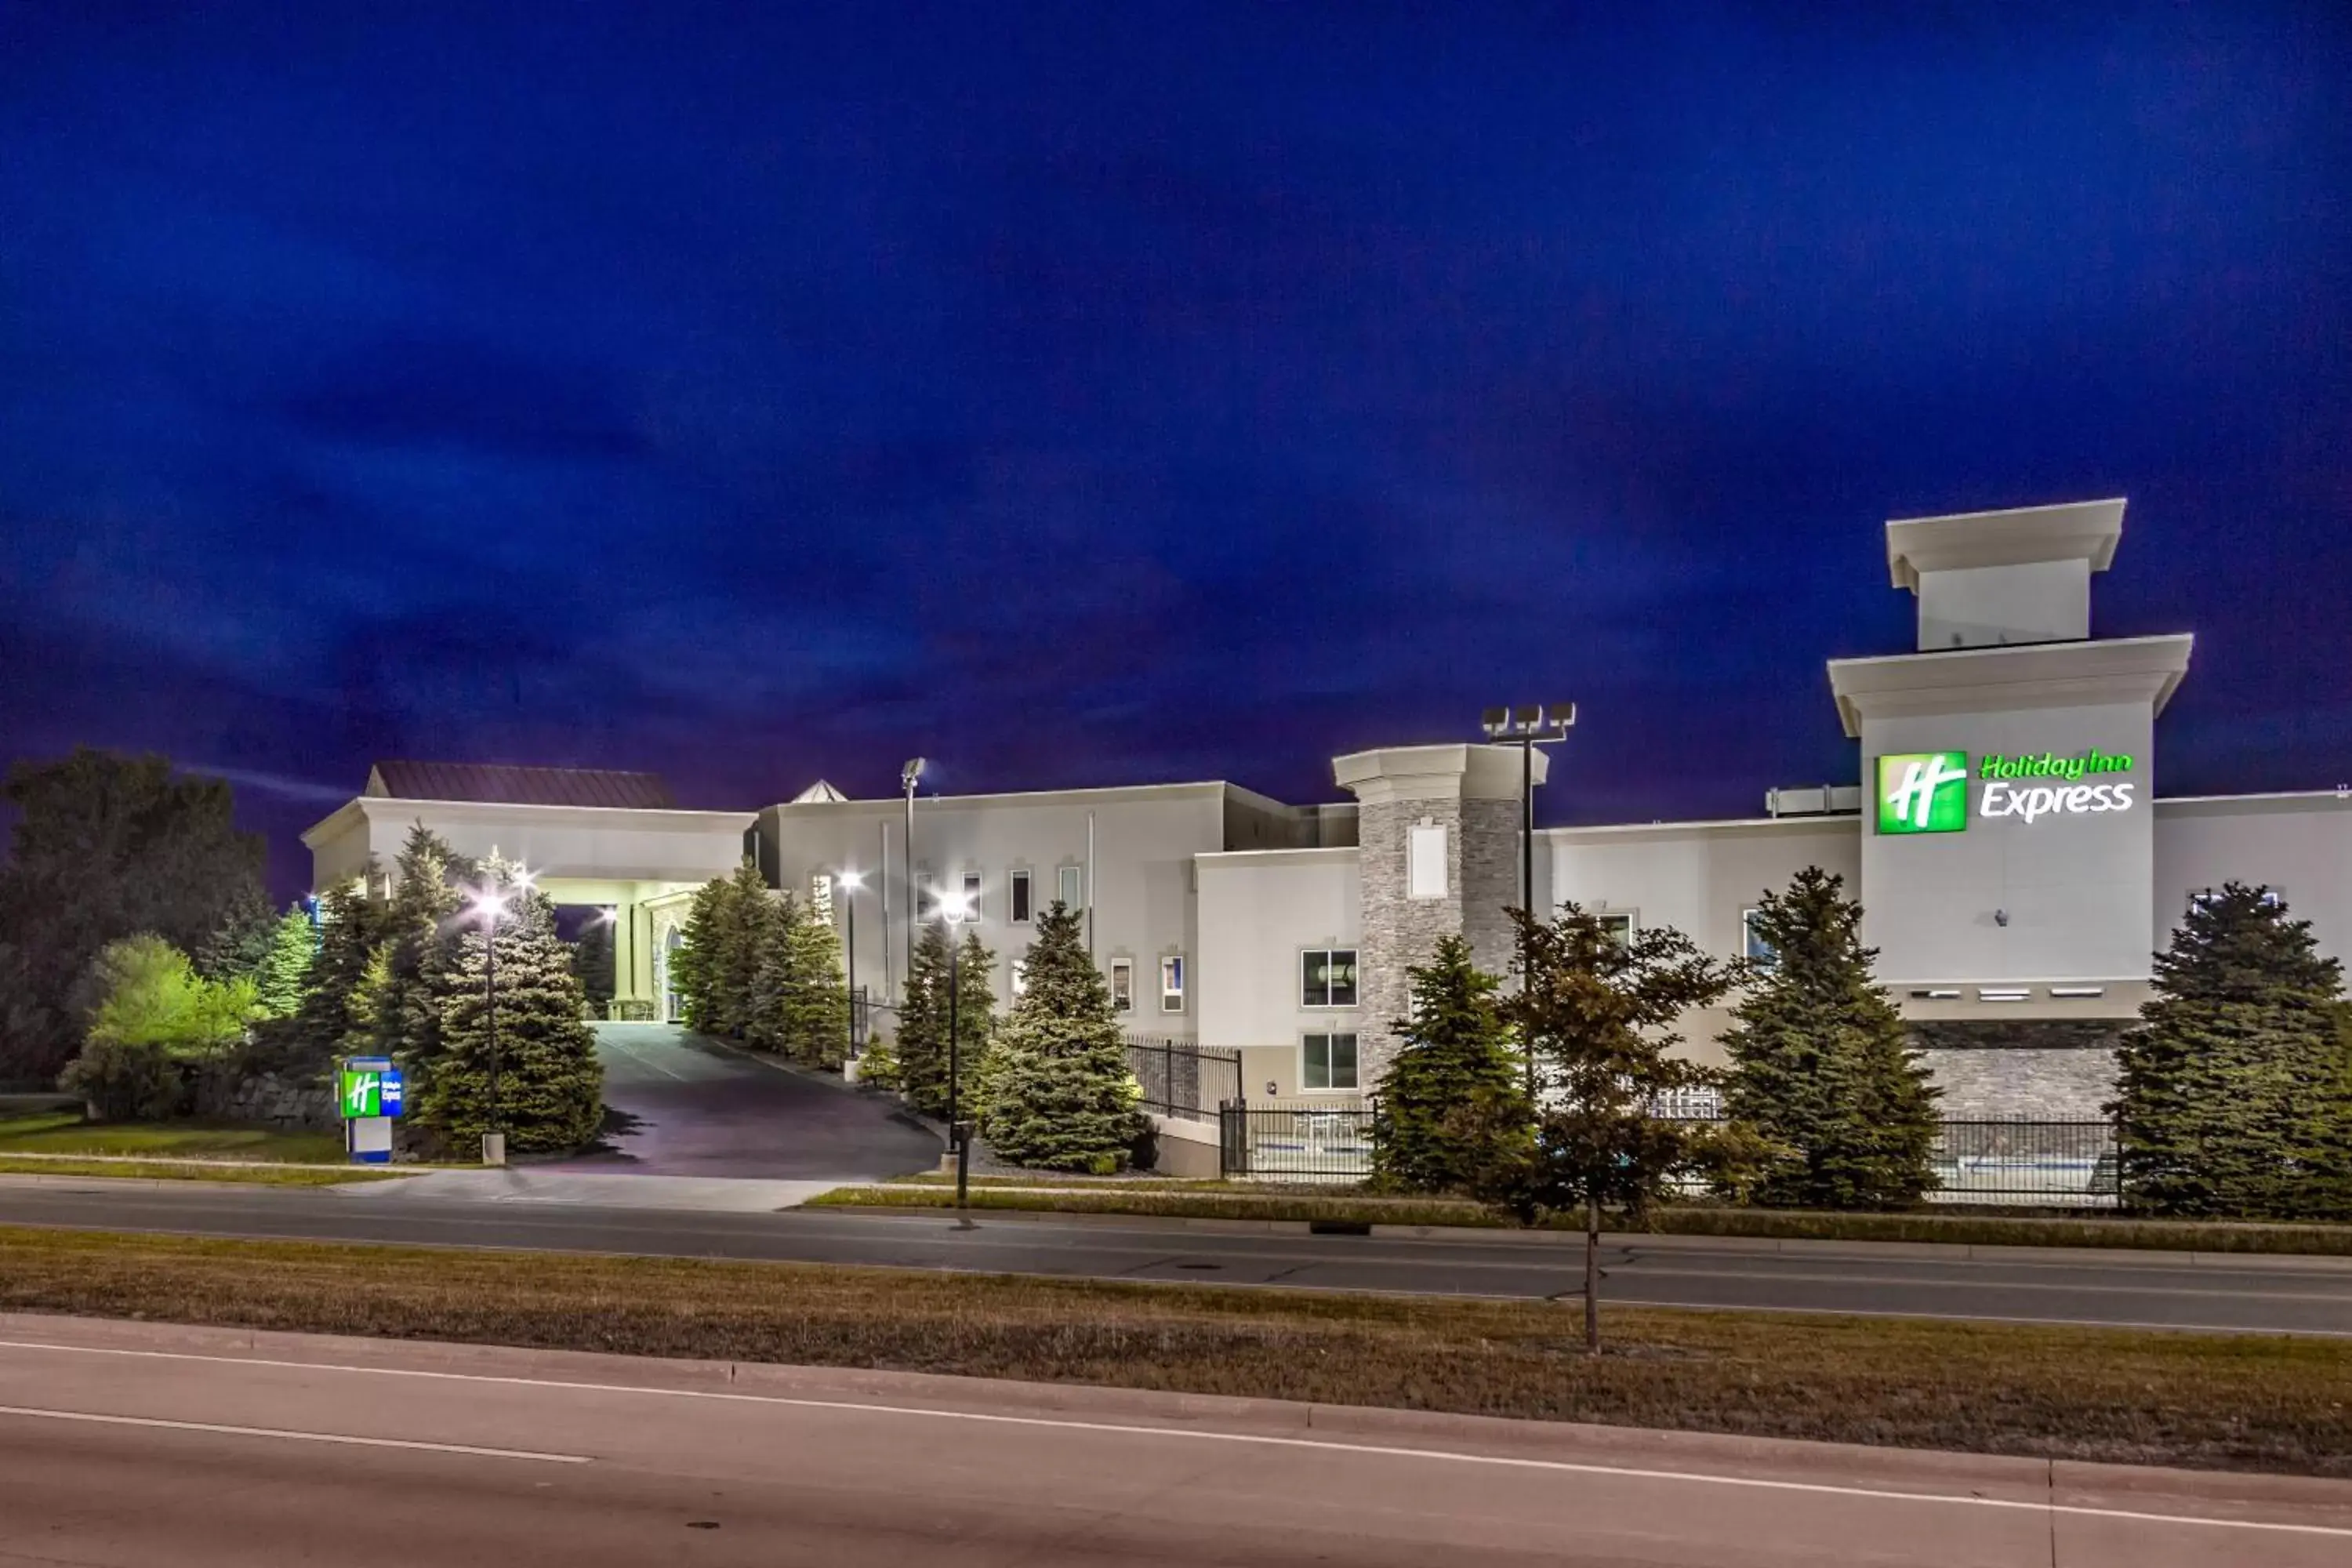 Property Building in Holiday Inn Express Wisconsin Dells, an IHG Hotel